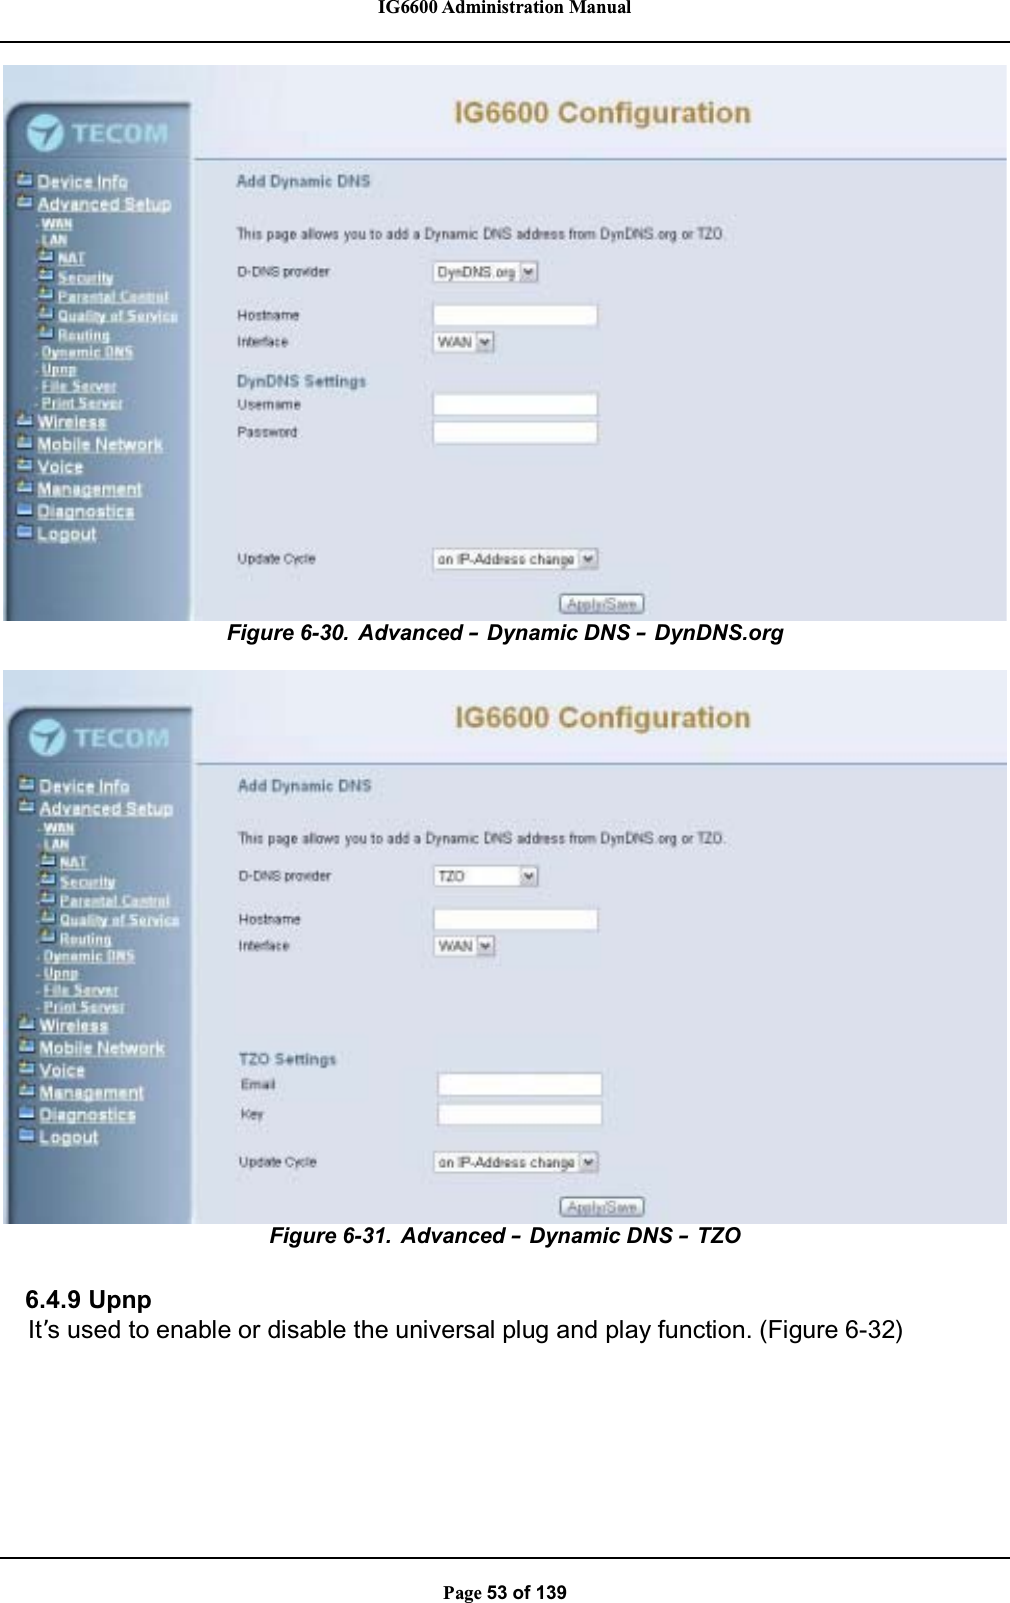 IG6600 Administration ManualPage 53 of 139Figure 6-30. Advanced –Dynamic DNS –DynDNS.orgFigure 6-31. Advanced –Dynamic DNS –TZO6.4.9 UpnpIt’s used to enable or disable the universal plug and play function. (Figure 6-32)